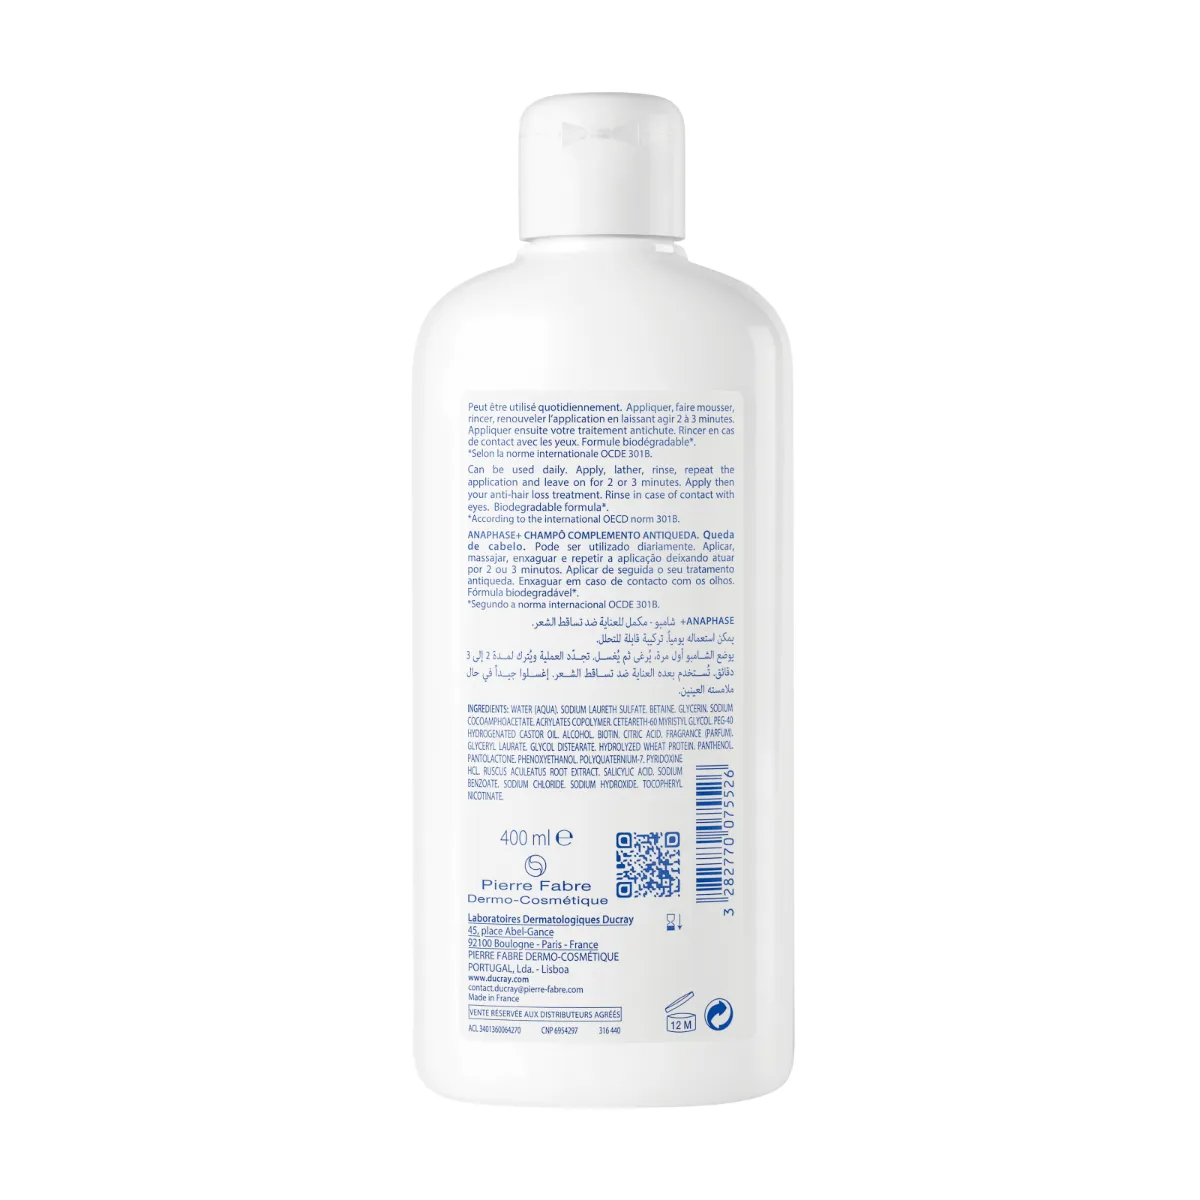 Sampon fortifiant si revitalizant Anaphase+, 400 ml, Ducray 